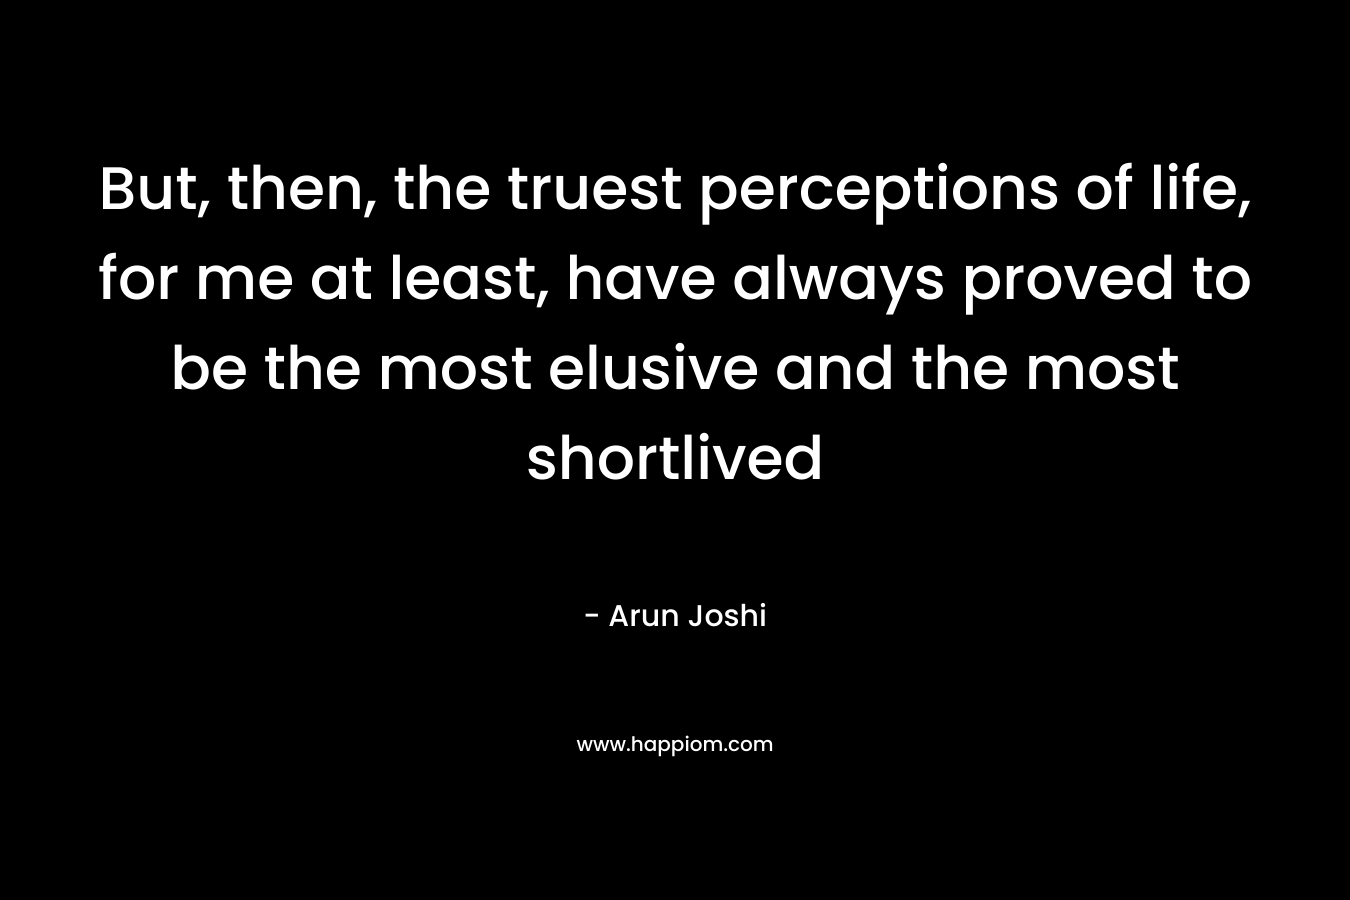 But, then, the truest perceptions of life, for me at least, have always proved to be the most elusive and the most shortlived – Arun Joshi